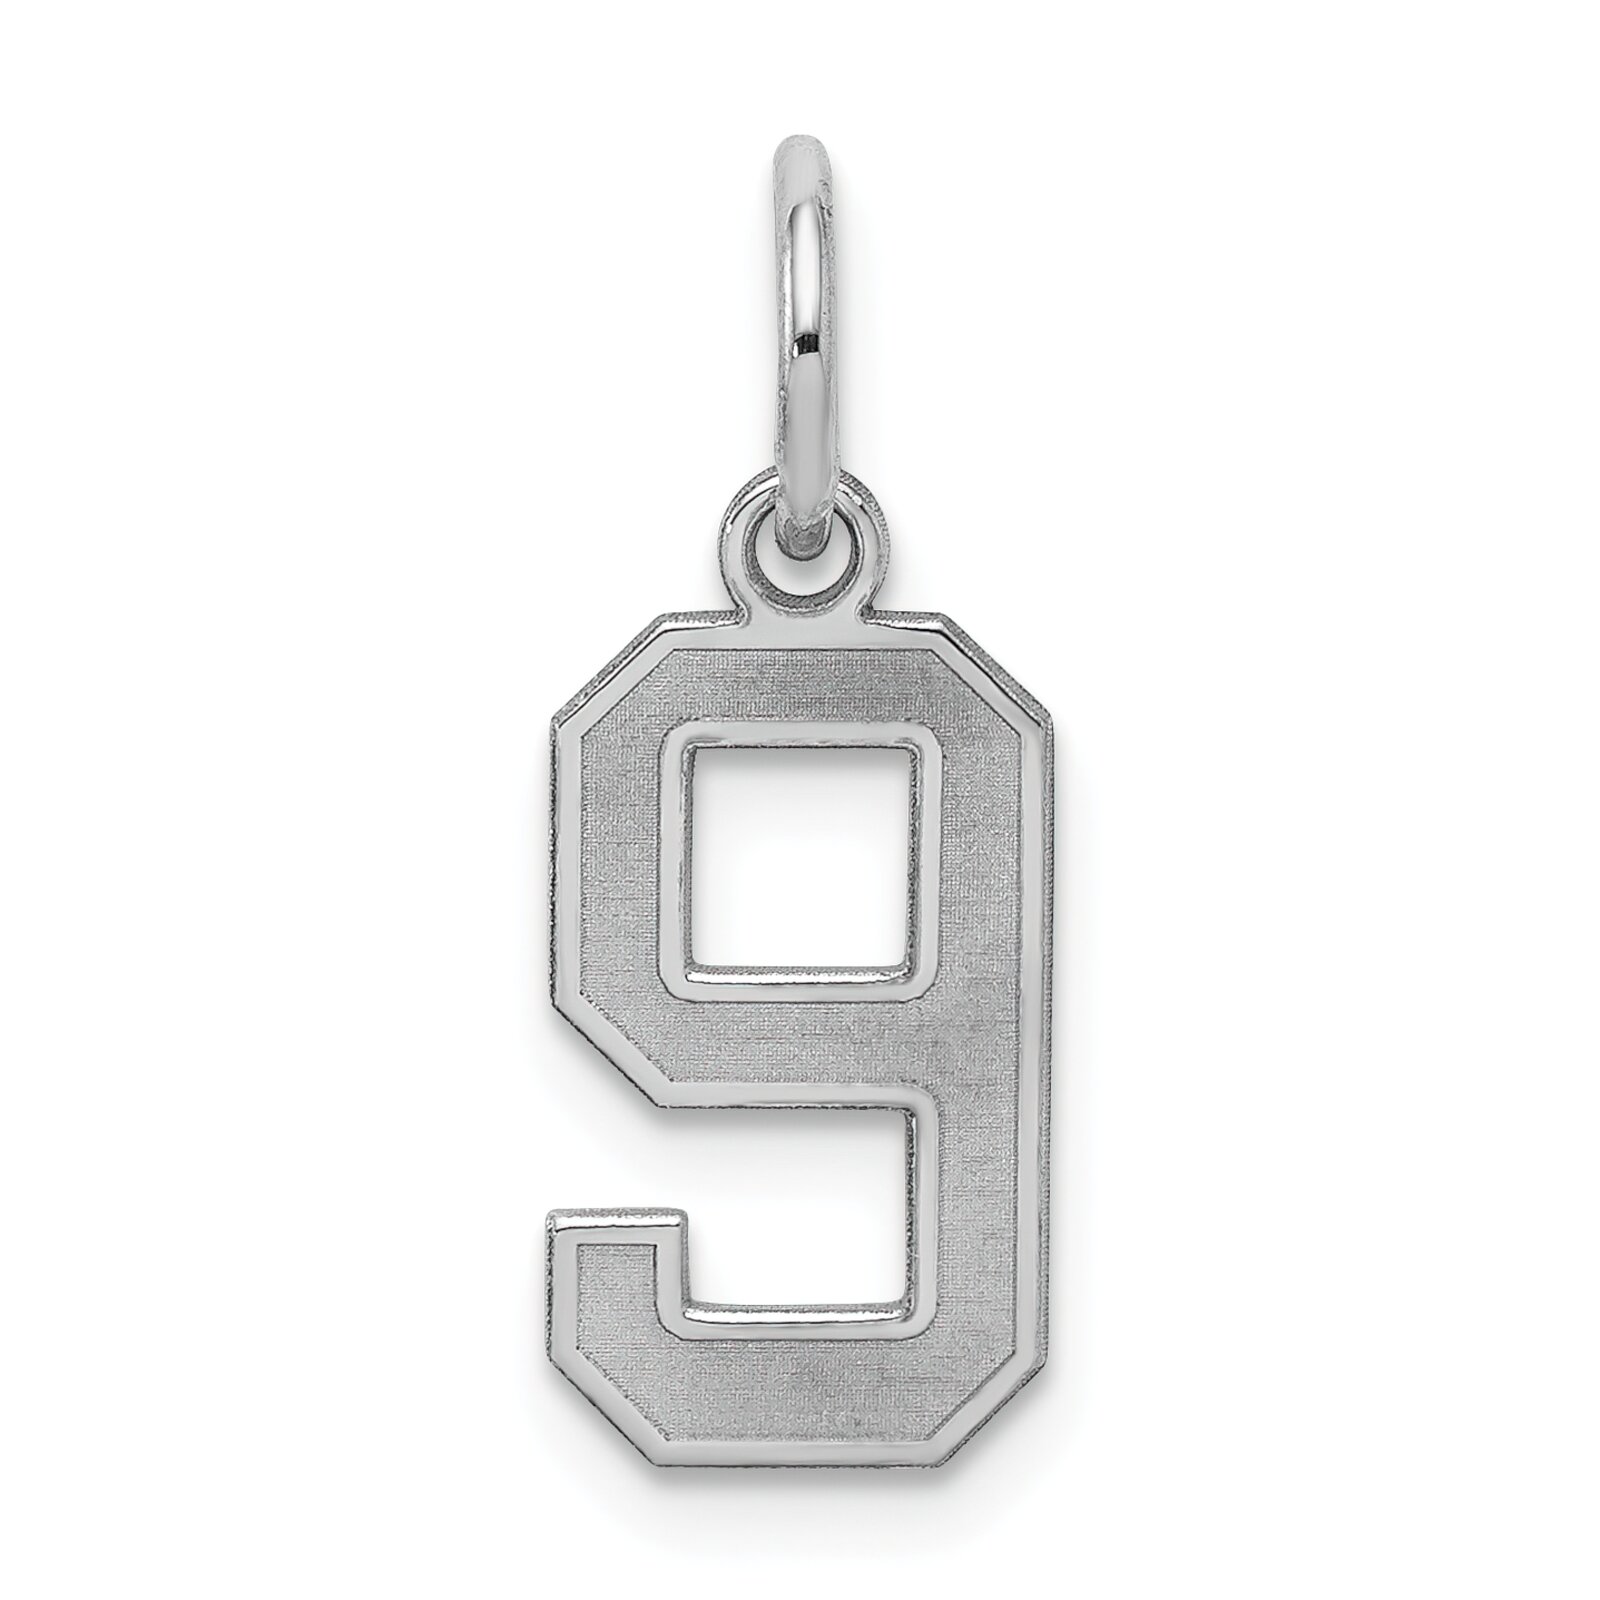 Findingking Sterling Silver Small Satin Number 9 Charm